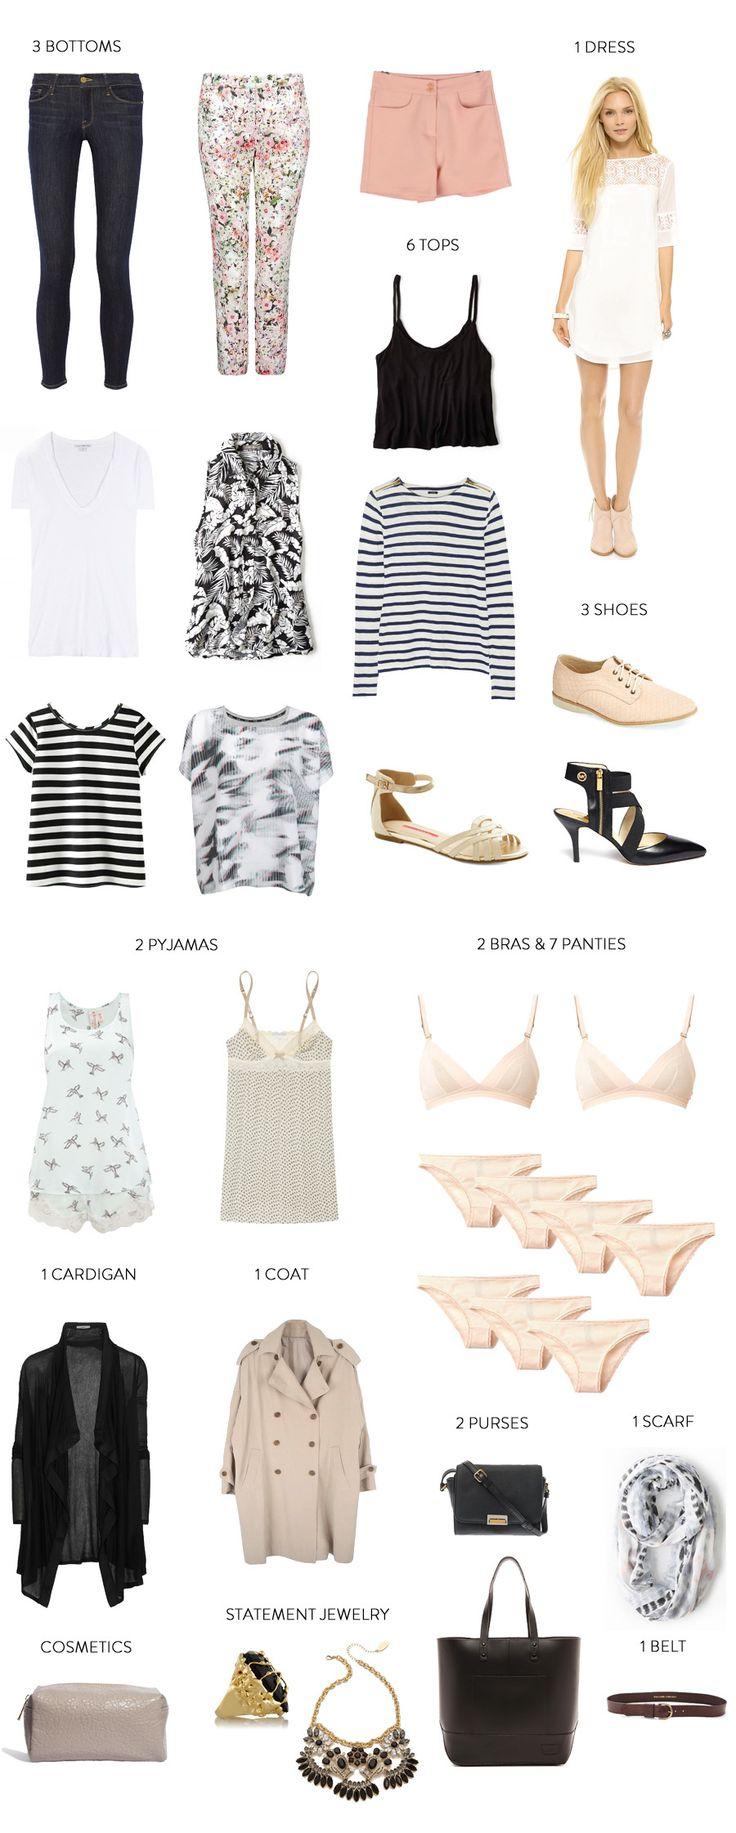 Wedding - How To Pack For A Week In A Carry On (in Style)